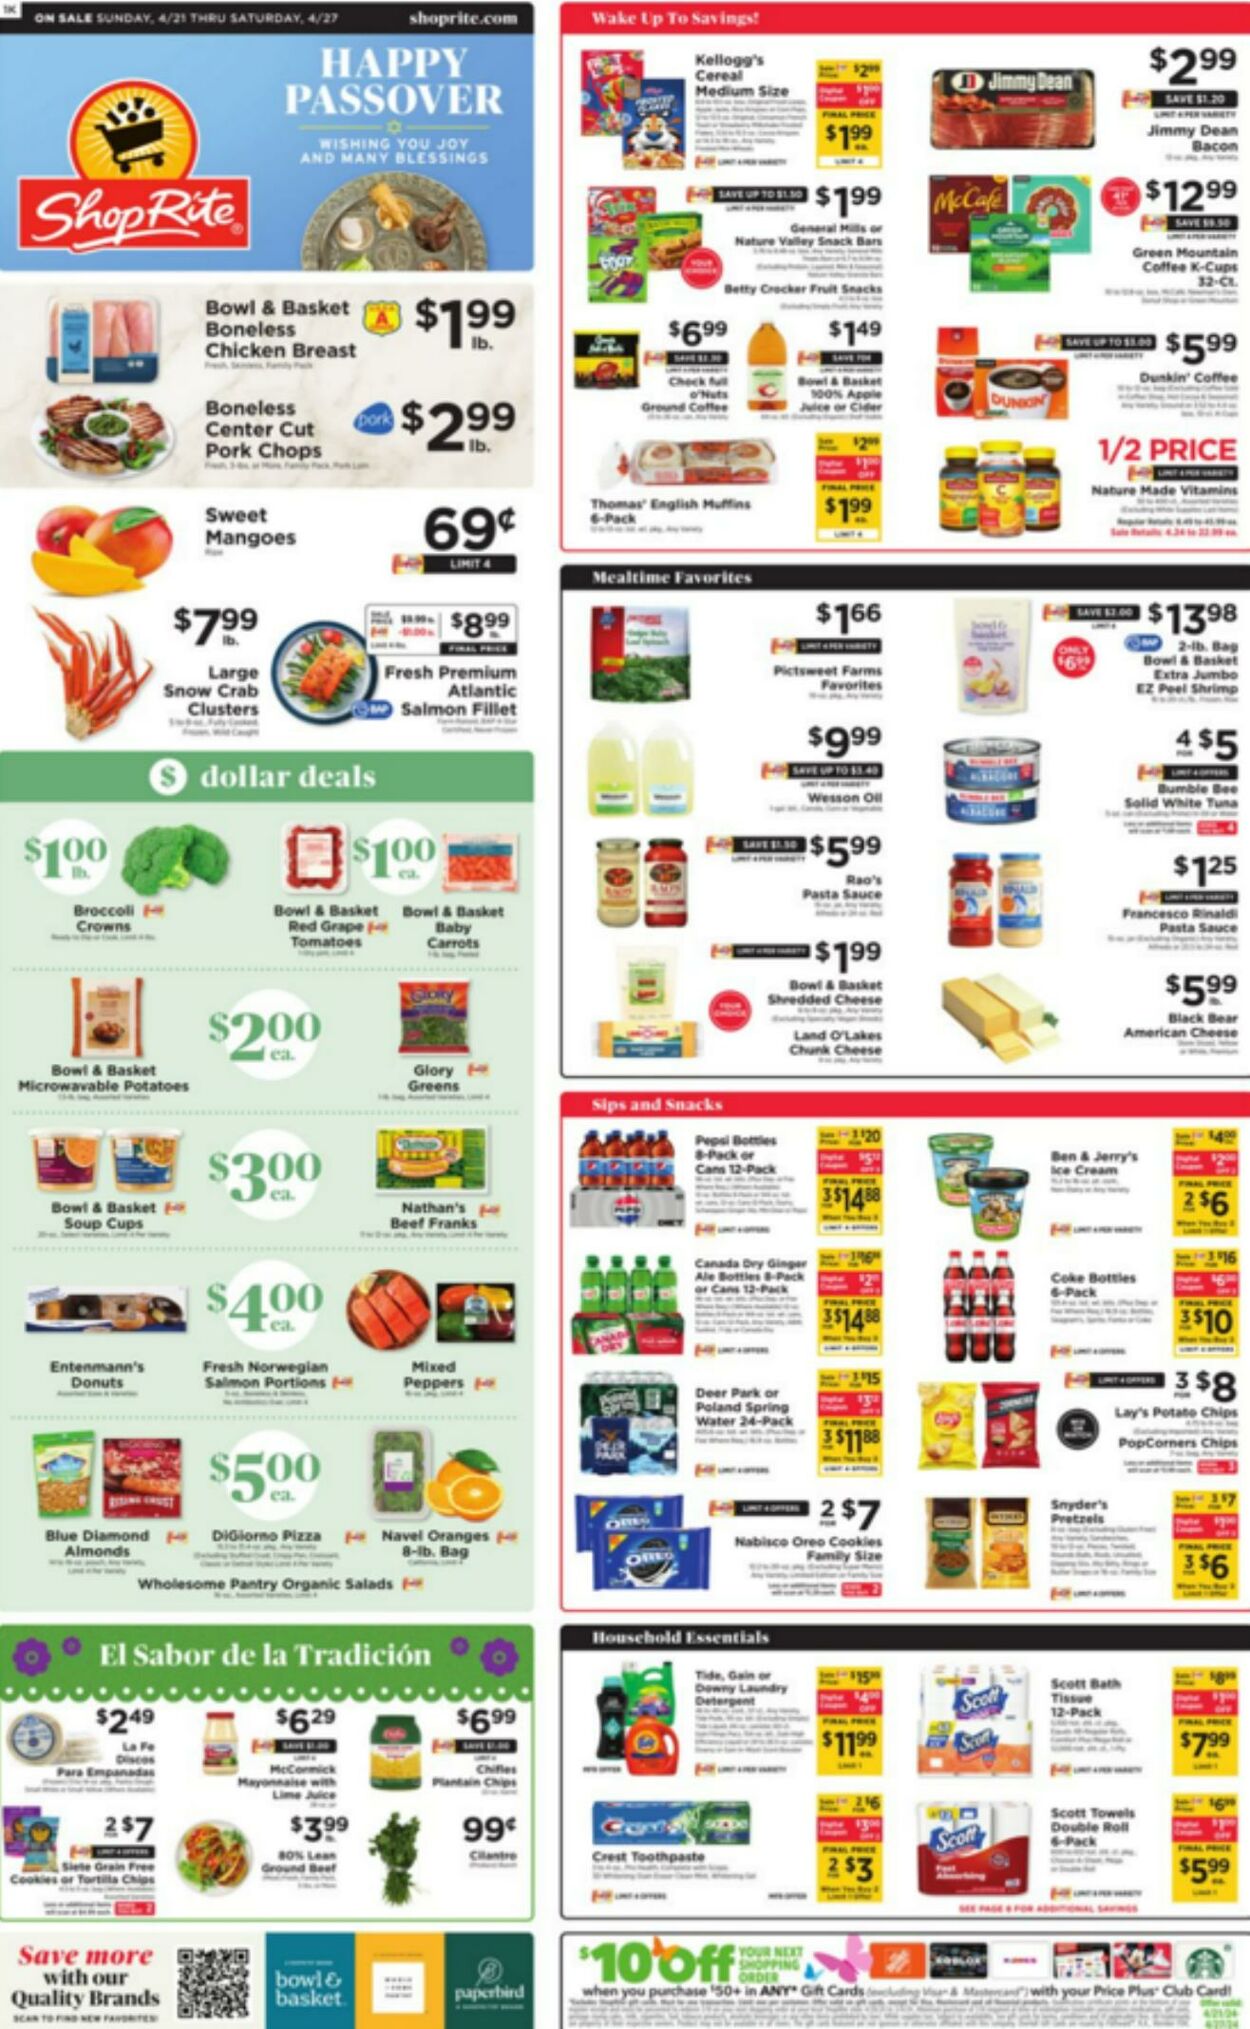 ShopRite Promotional weekly ads